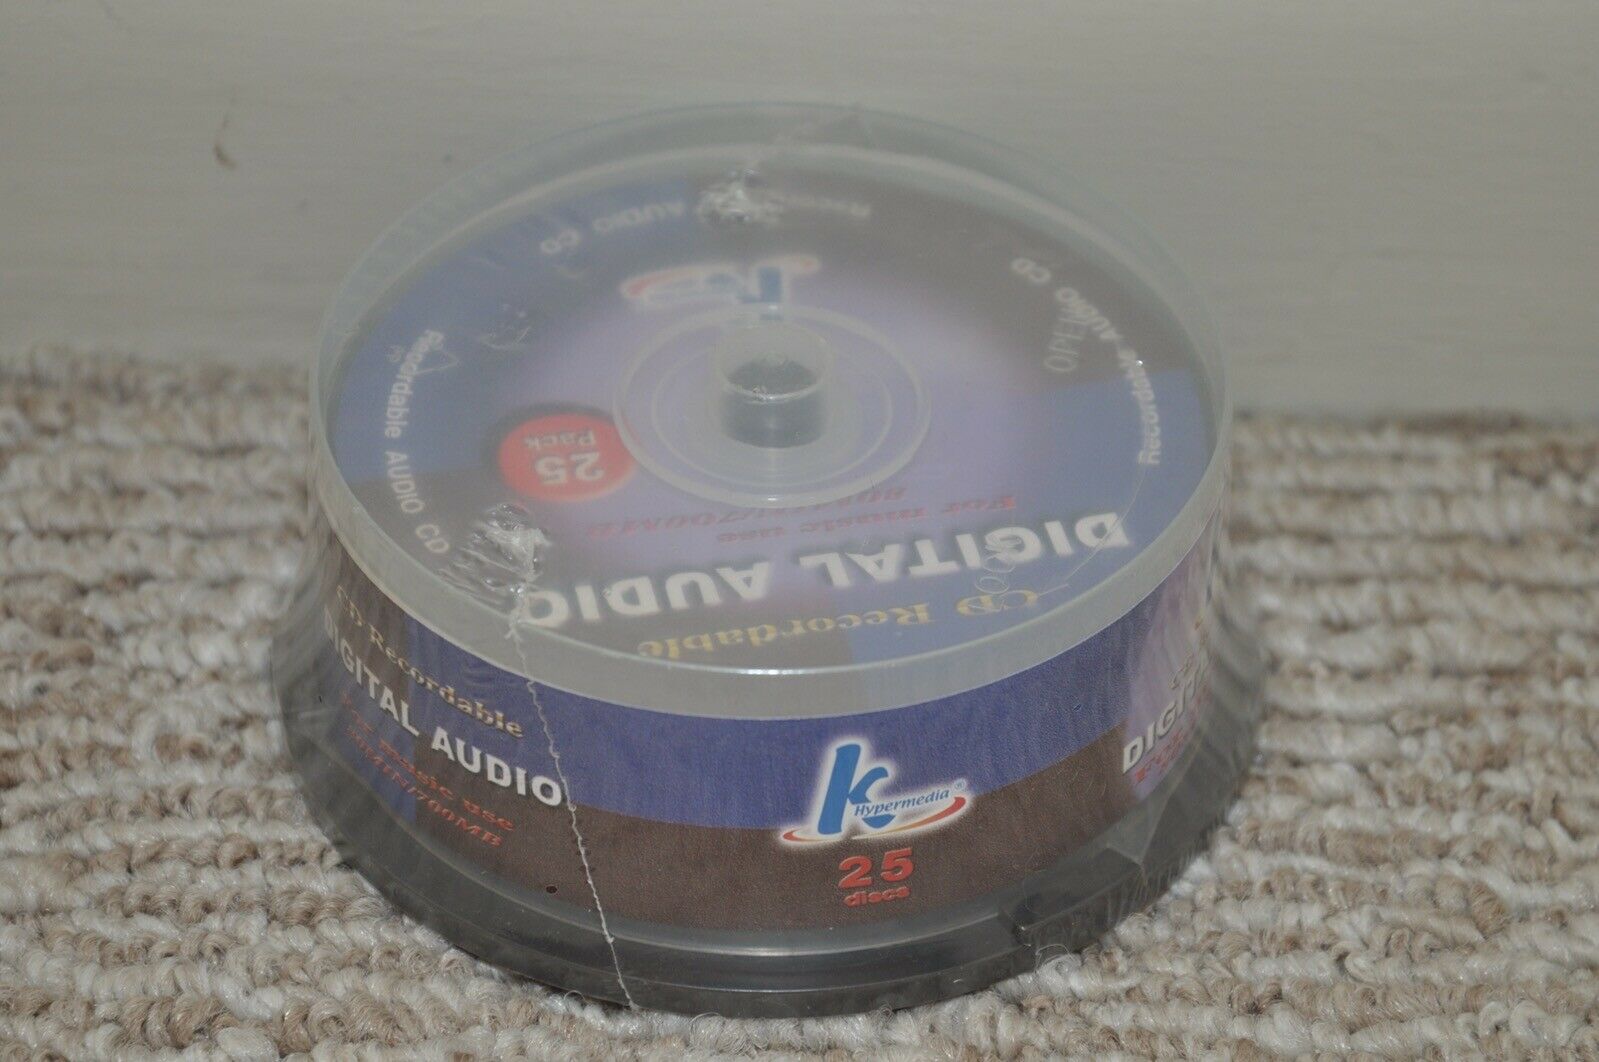 K Hypermedia Cd-r Audio Recordable, 80 Minute Audio Cd (25 On Spindle)